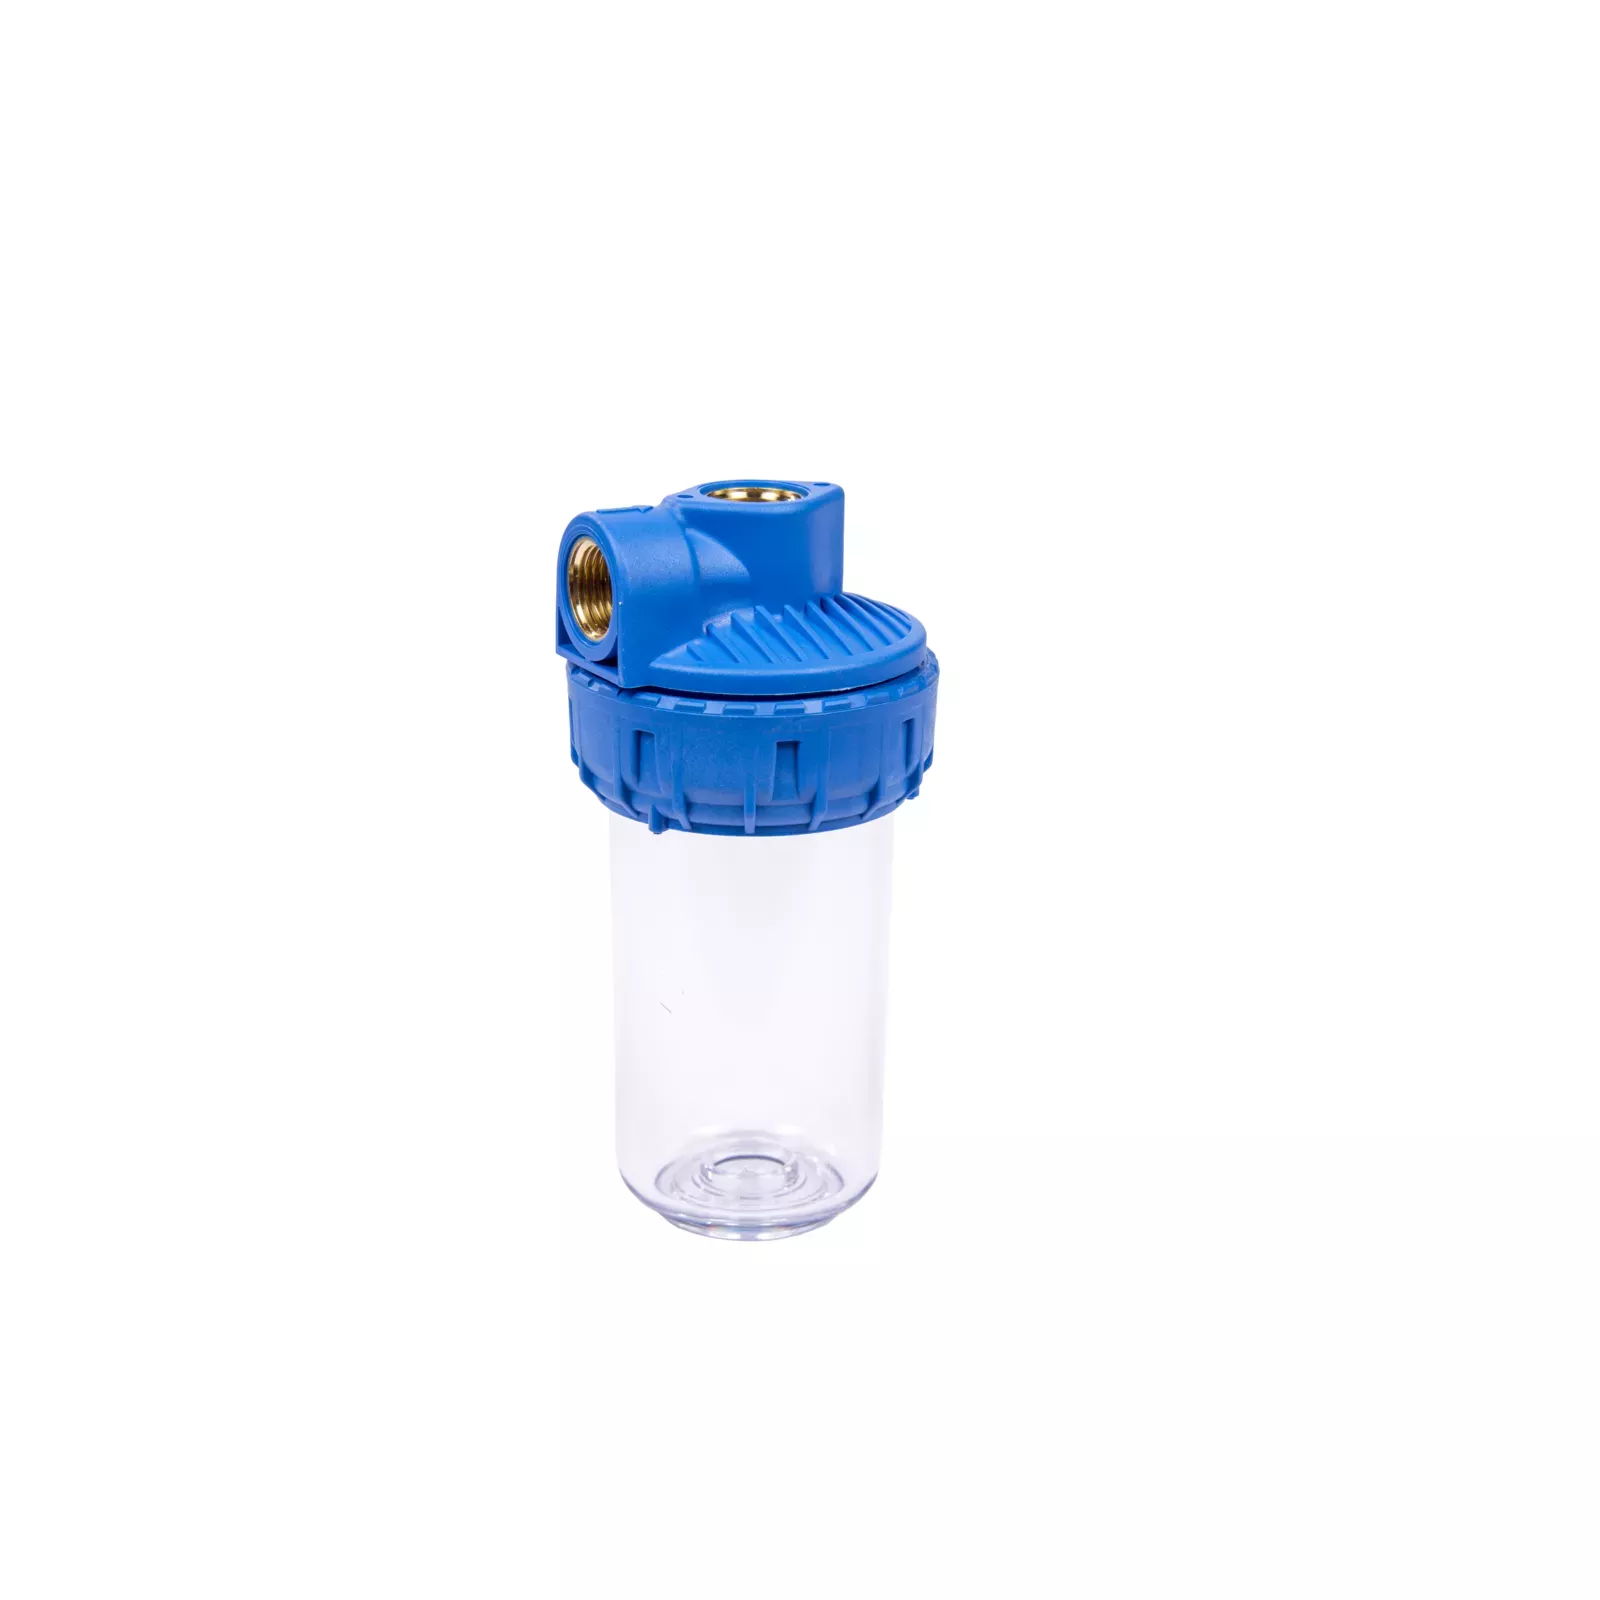 AMG water filters 7302871 Photo 1